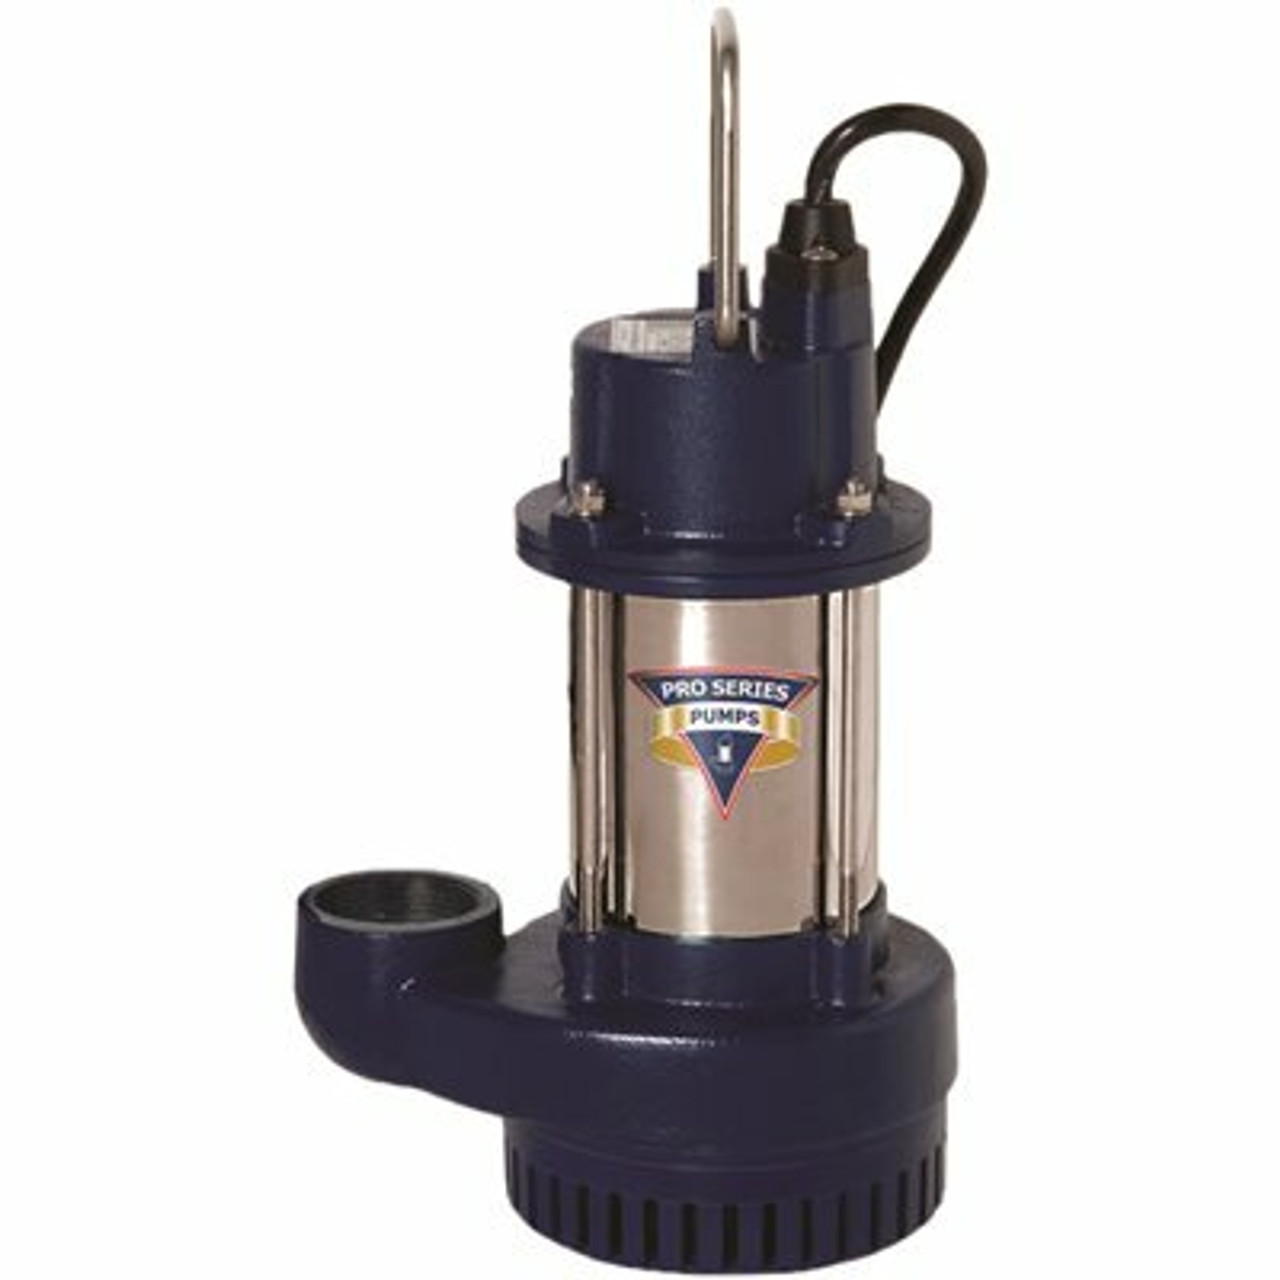 Pro Series Pumps 1/3 Hp Cast Iron / Stainless Steel Submersible Sump Pump